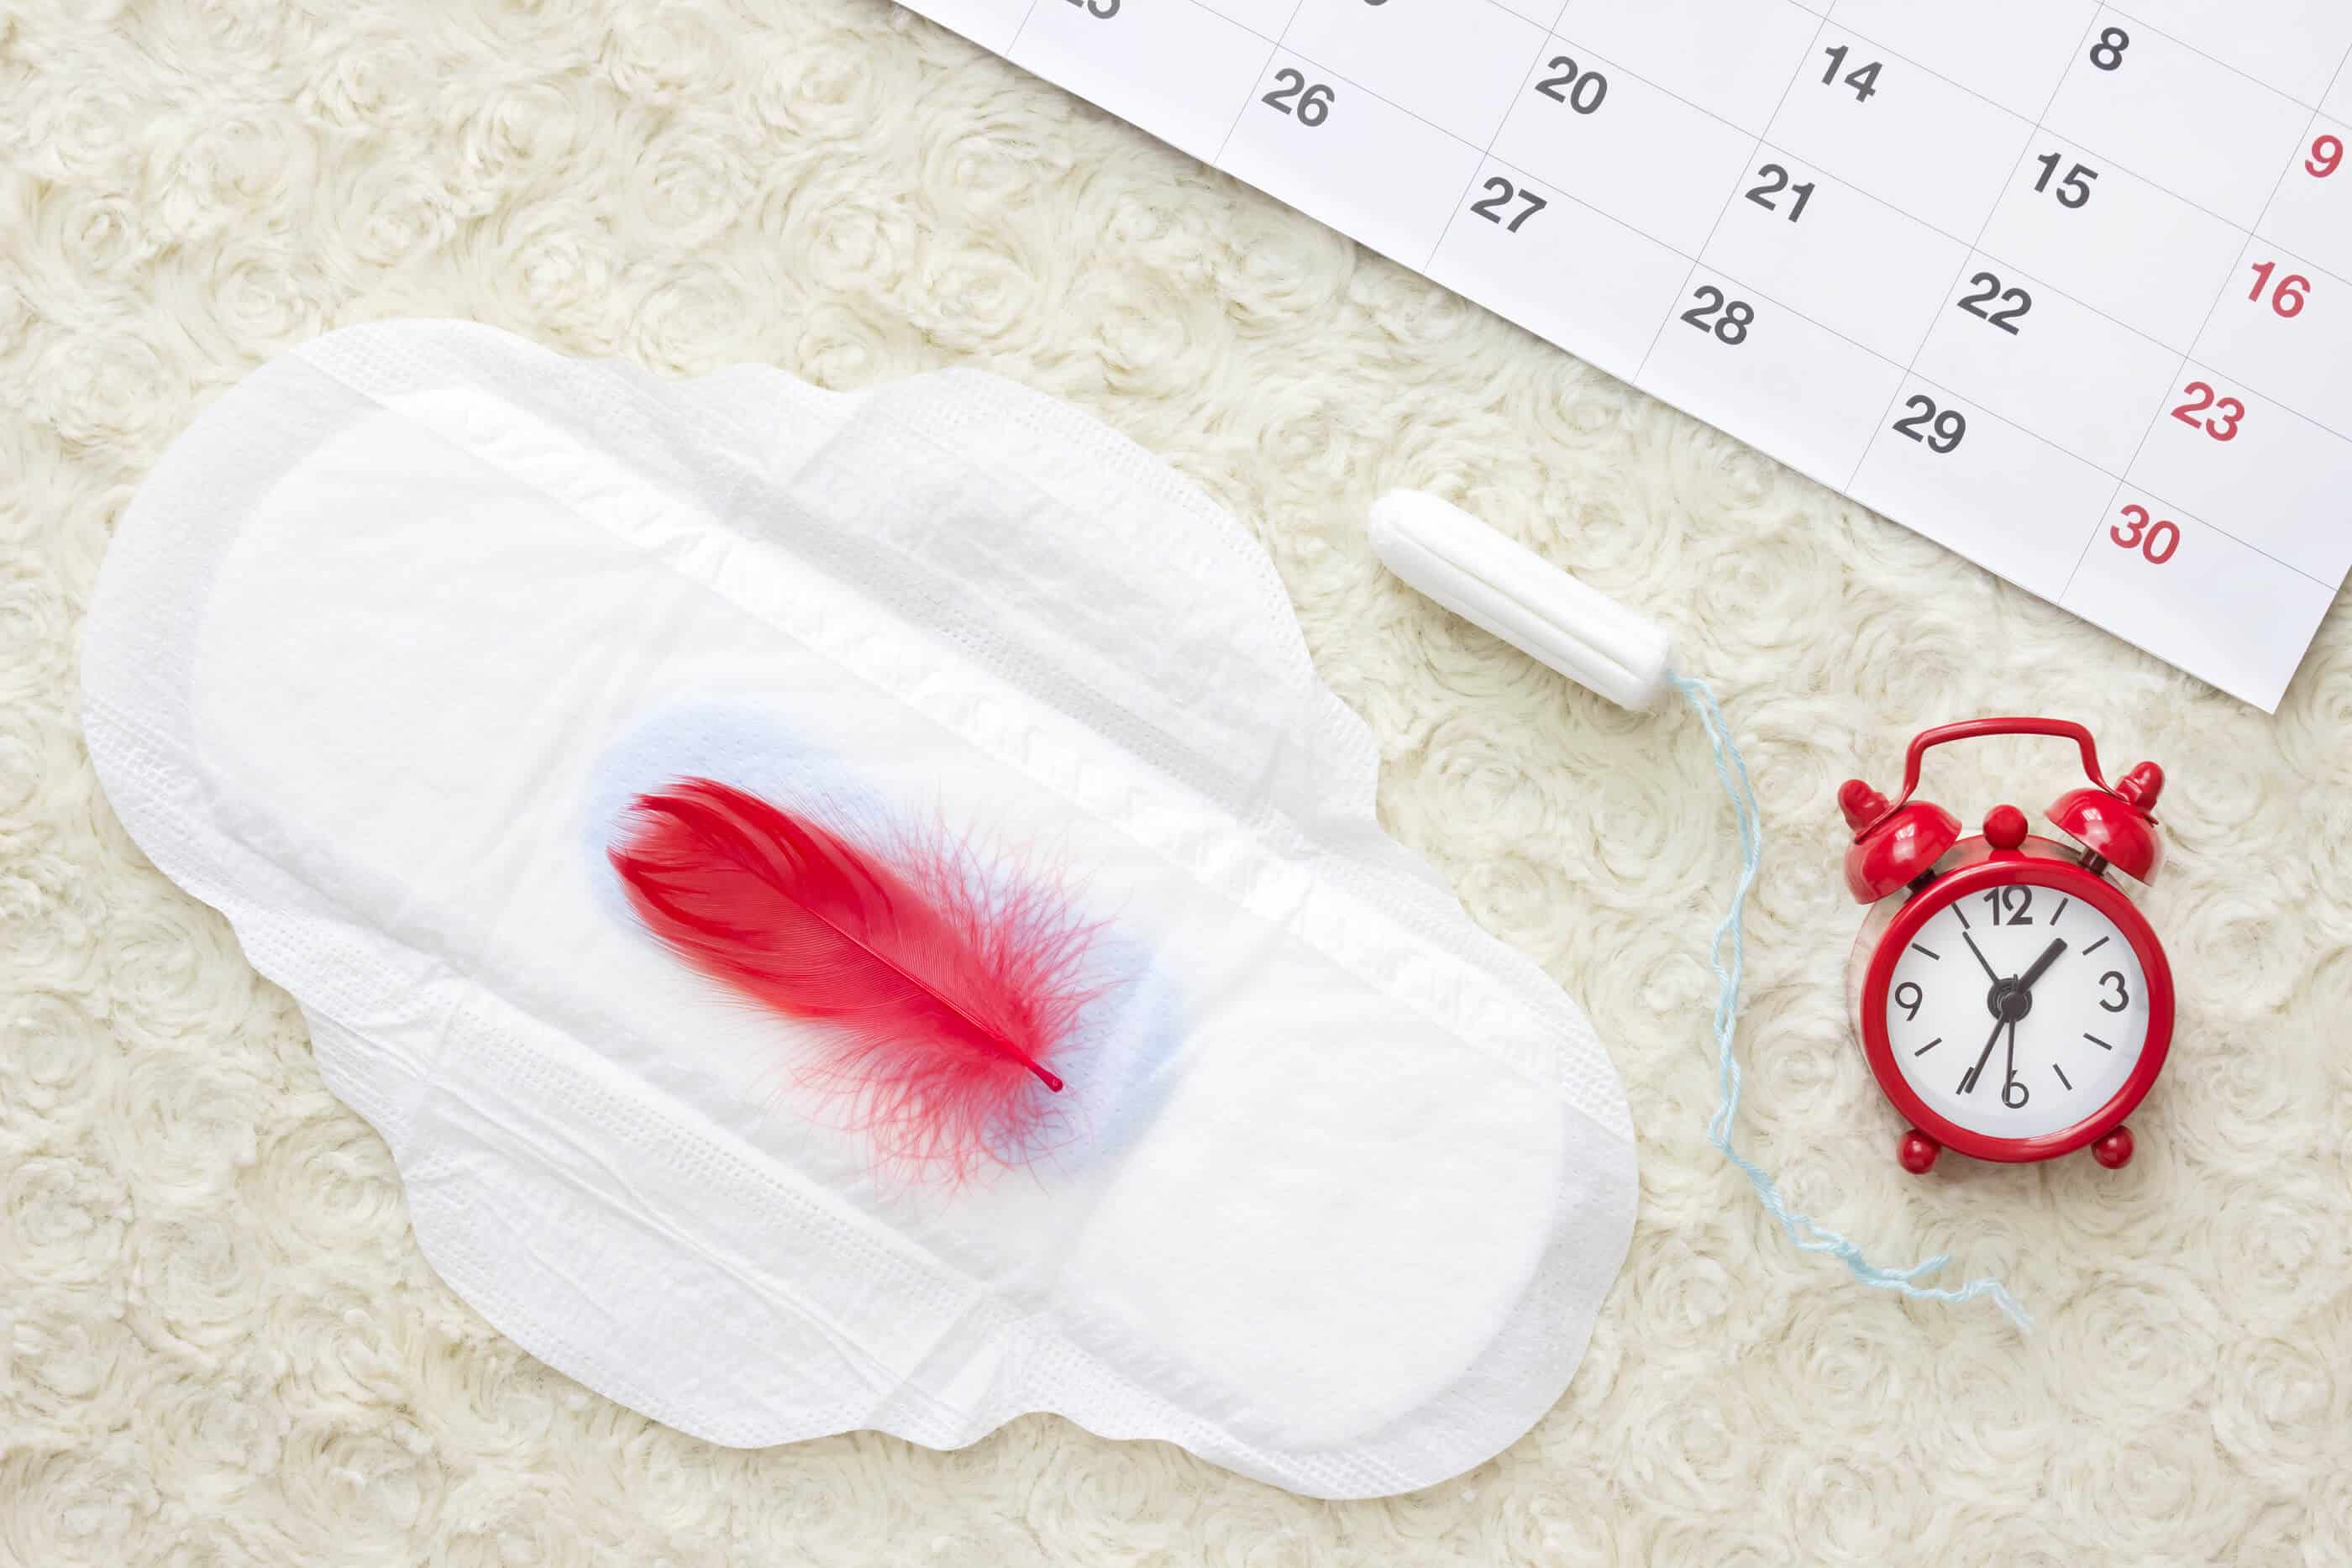 a pad with blood in the middle next to a stopwatch, piece of chalk, and calendar